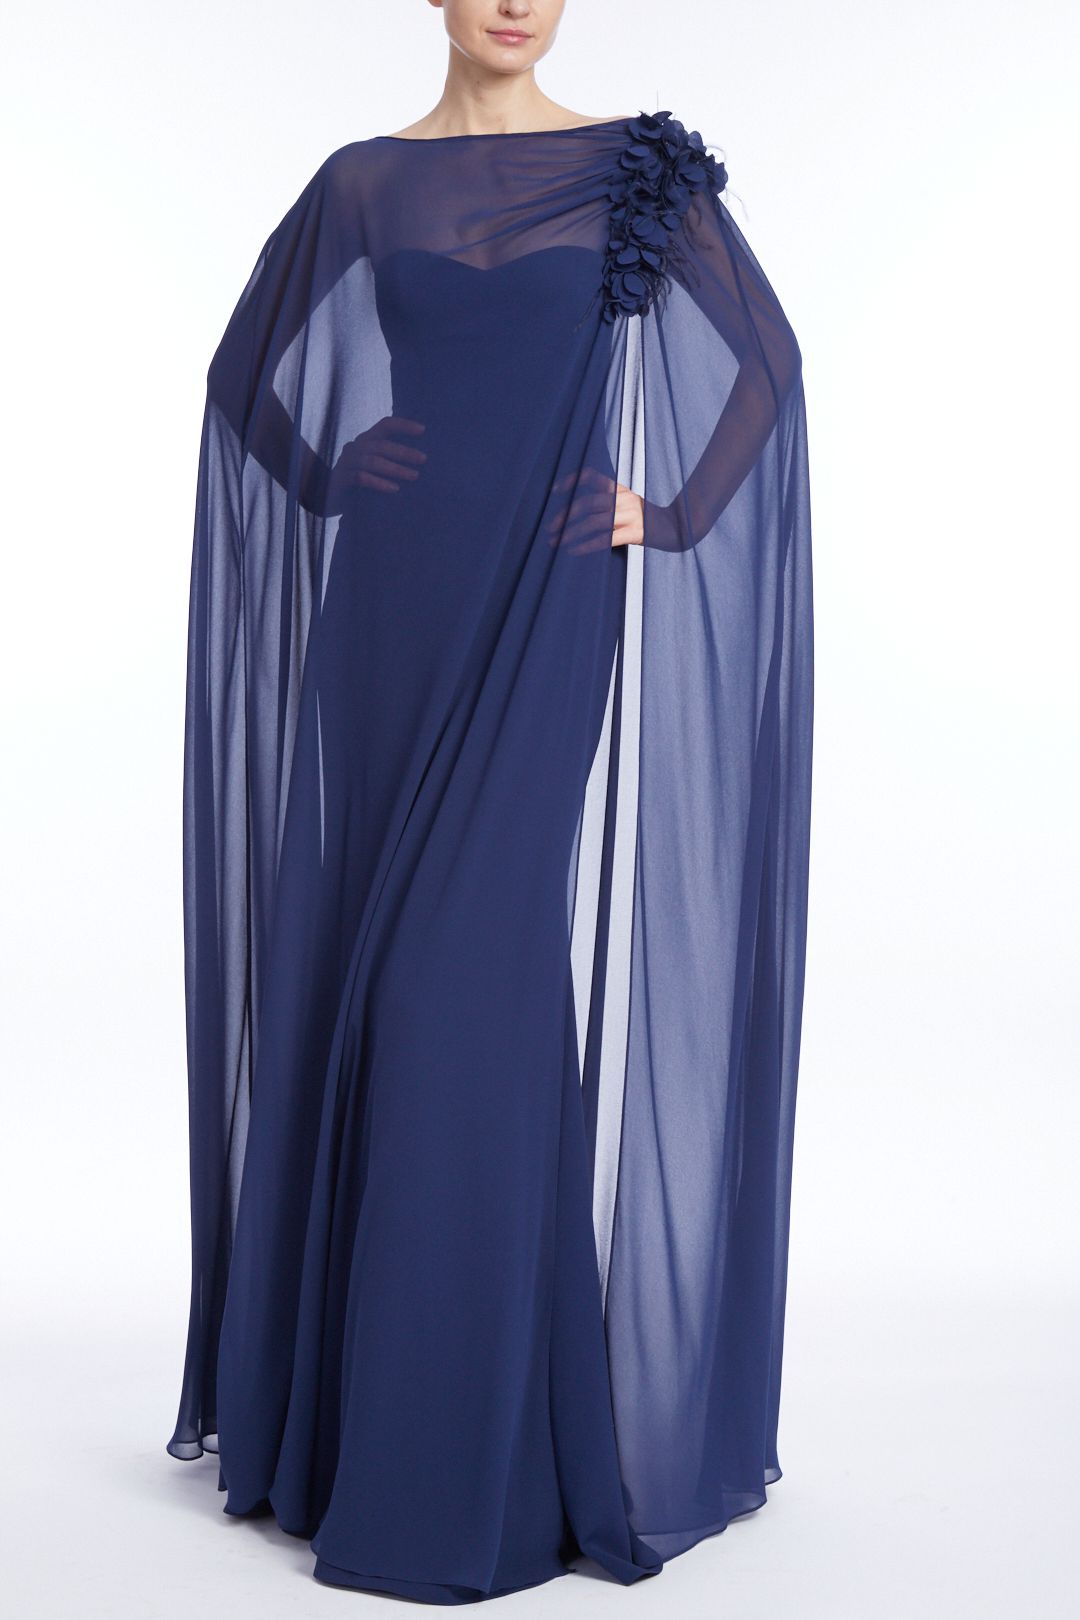 SHEER CAPED GOWN